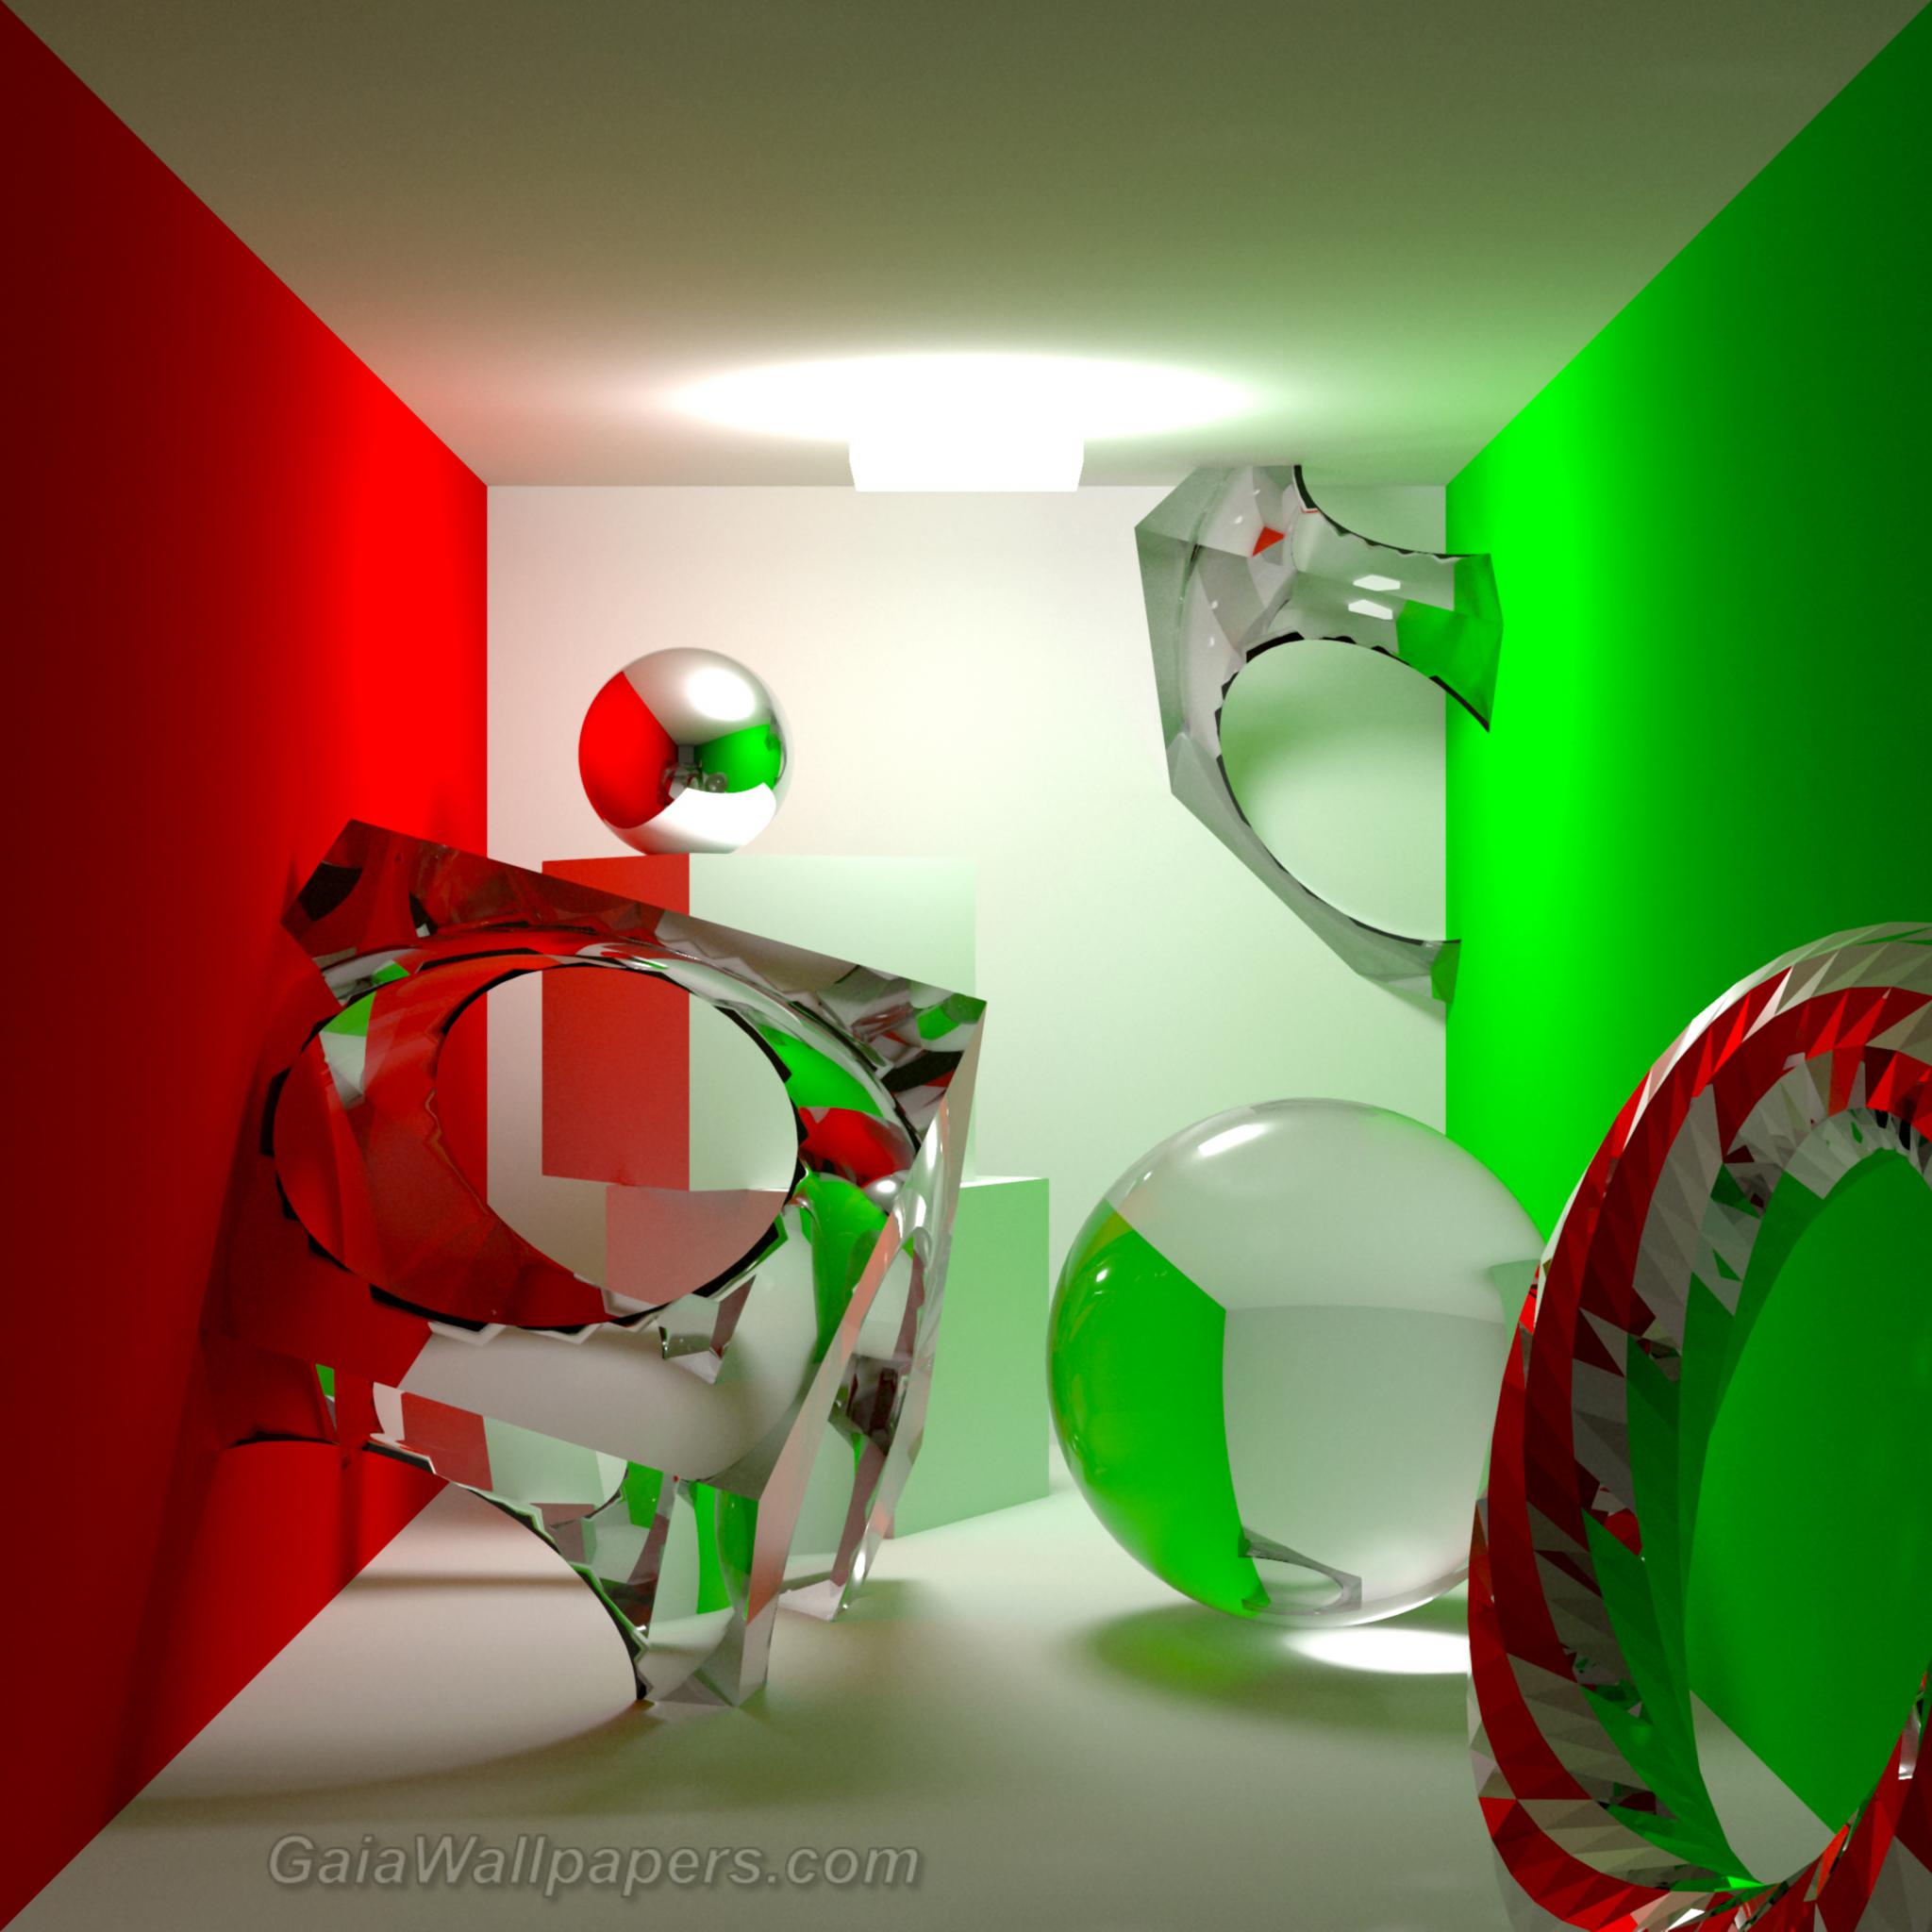 Ray tracing room with glass - Free desktop wallpapers